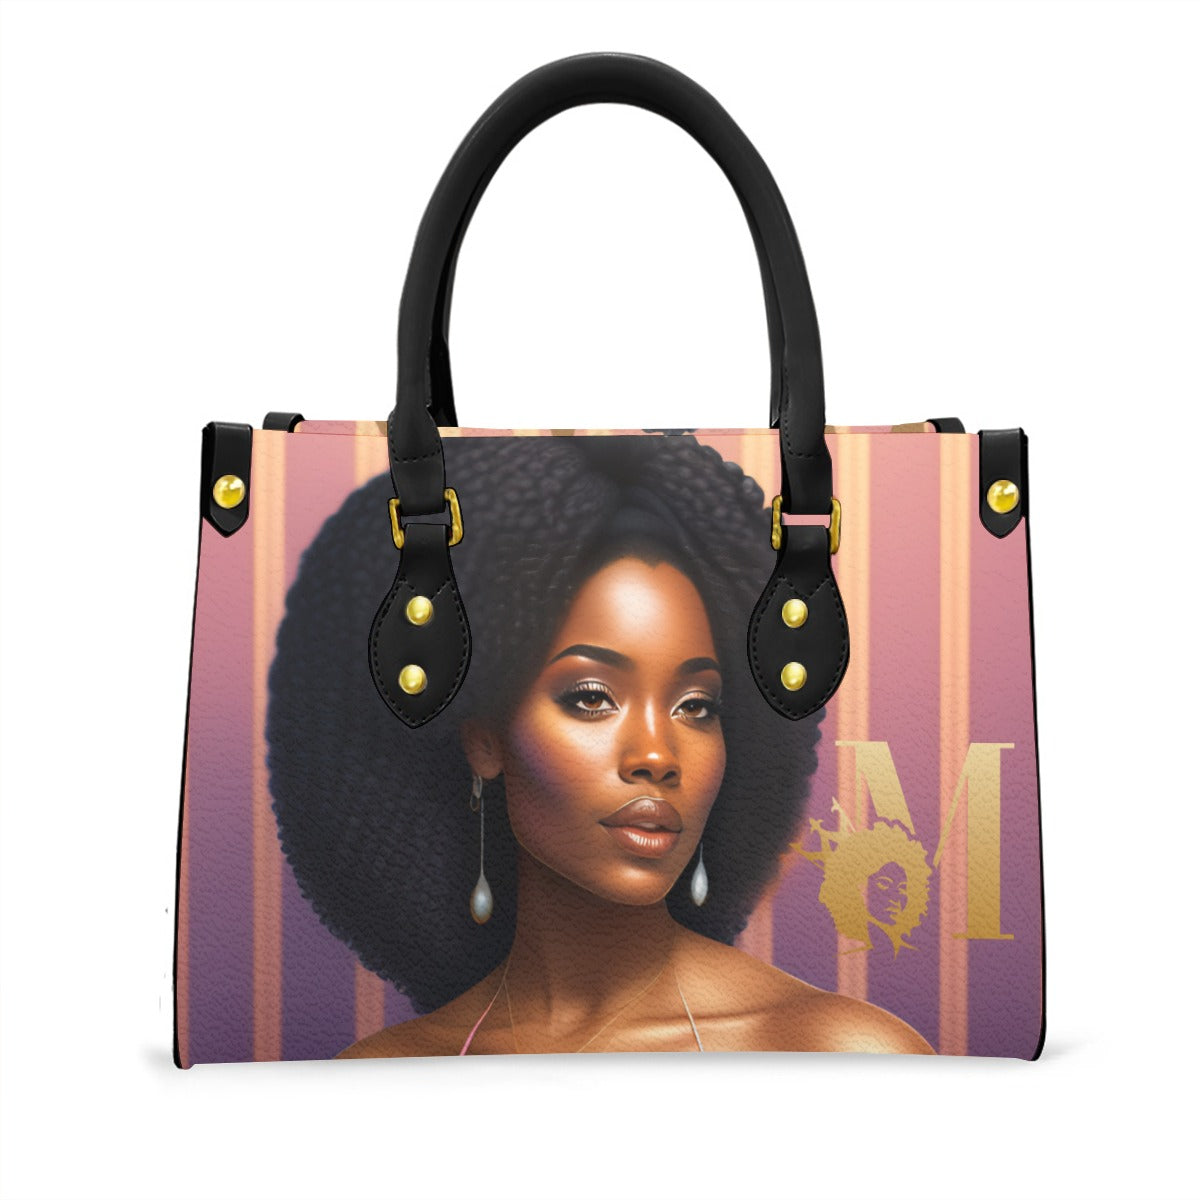 Angela by Melanin Queen - Women's Tote Bag With Black Handle